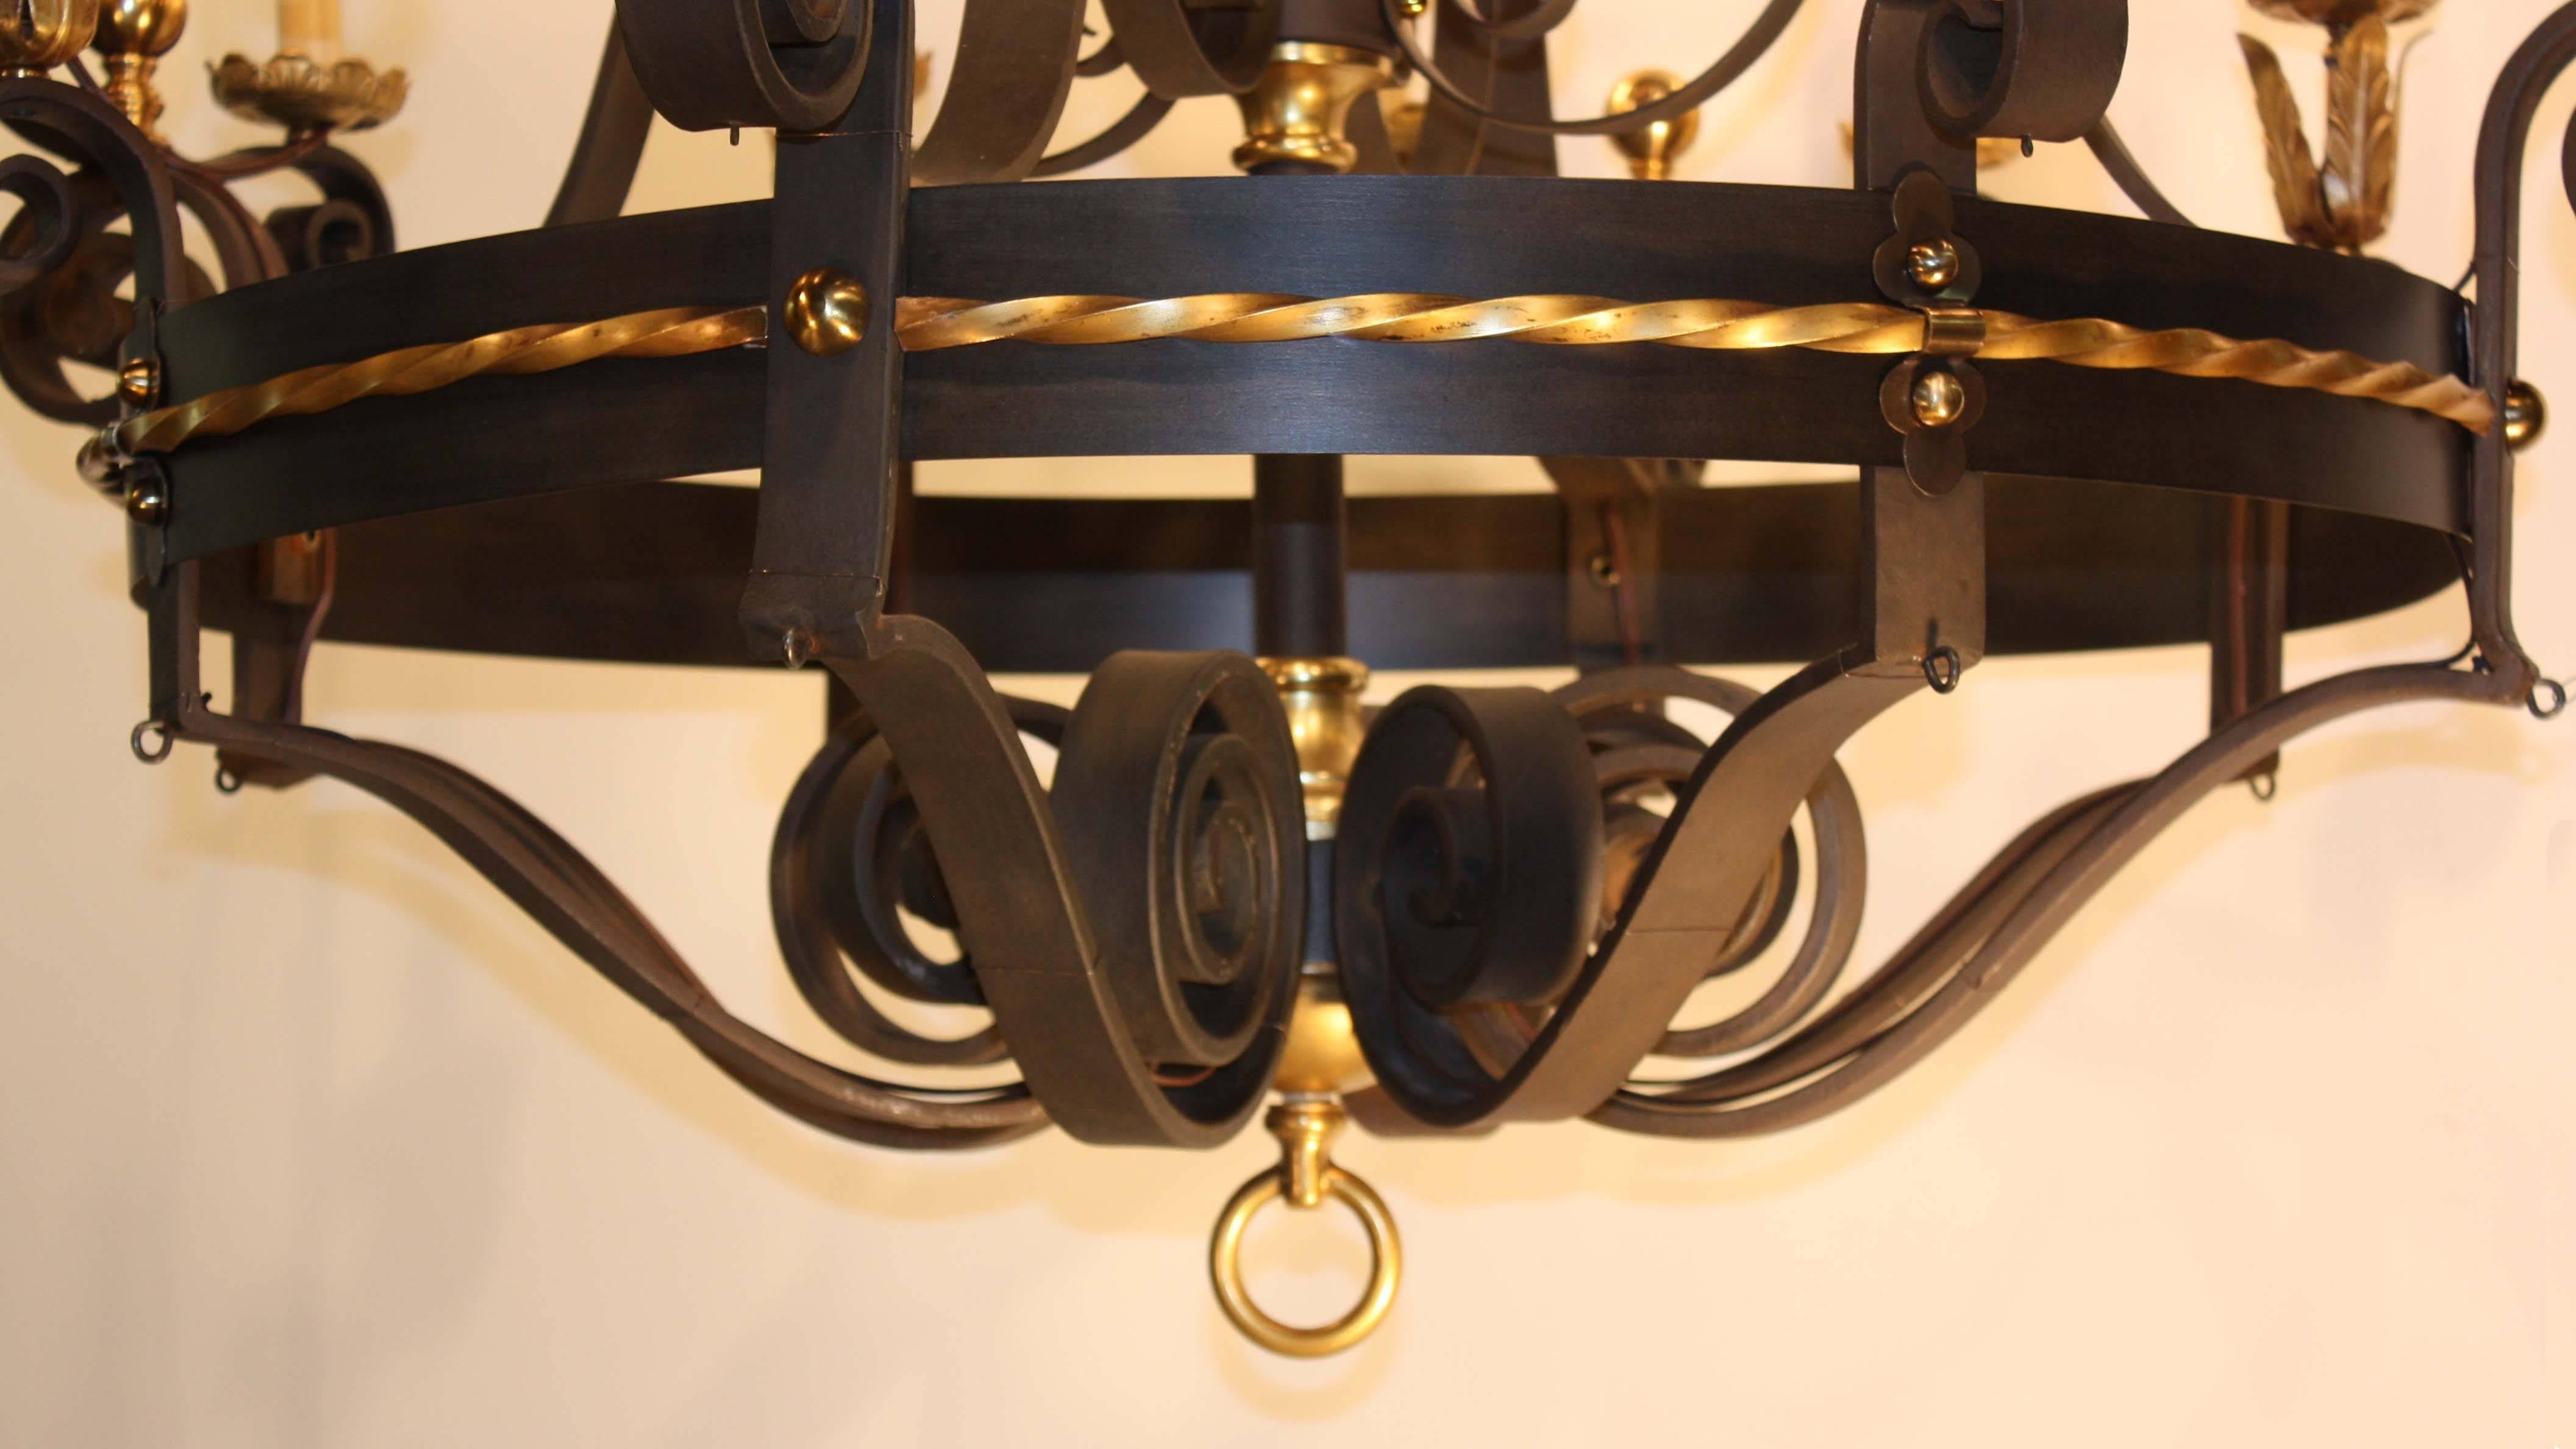 A massive antique ballroom chandelier; the frame in scrolling wrought iron, the upper tier with eight lights, the lower with 12, enriched with patinated brass drip pans, finials, and decorative banding. This imposing chandelier was removed from an